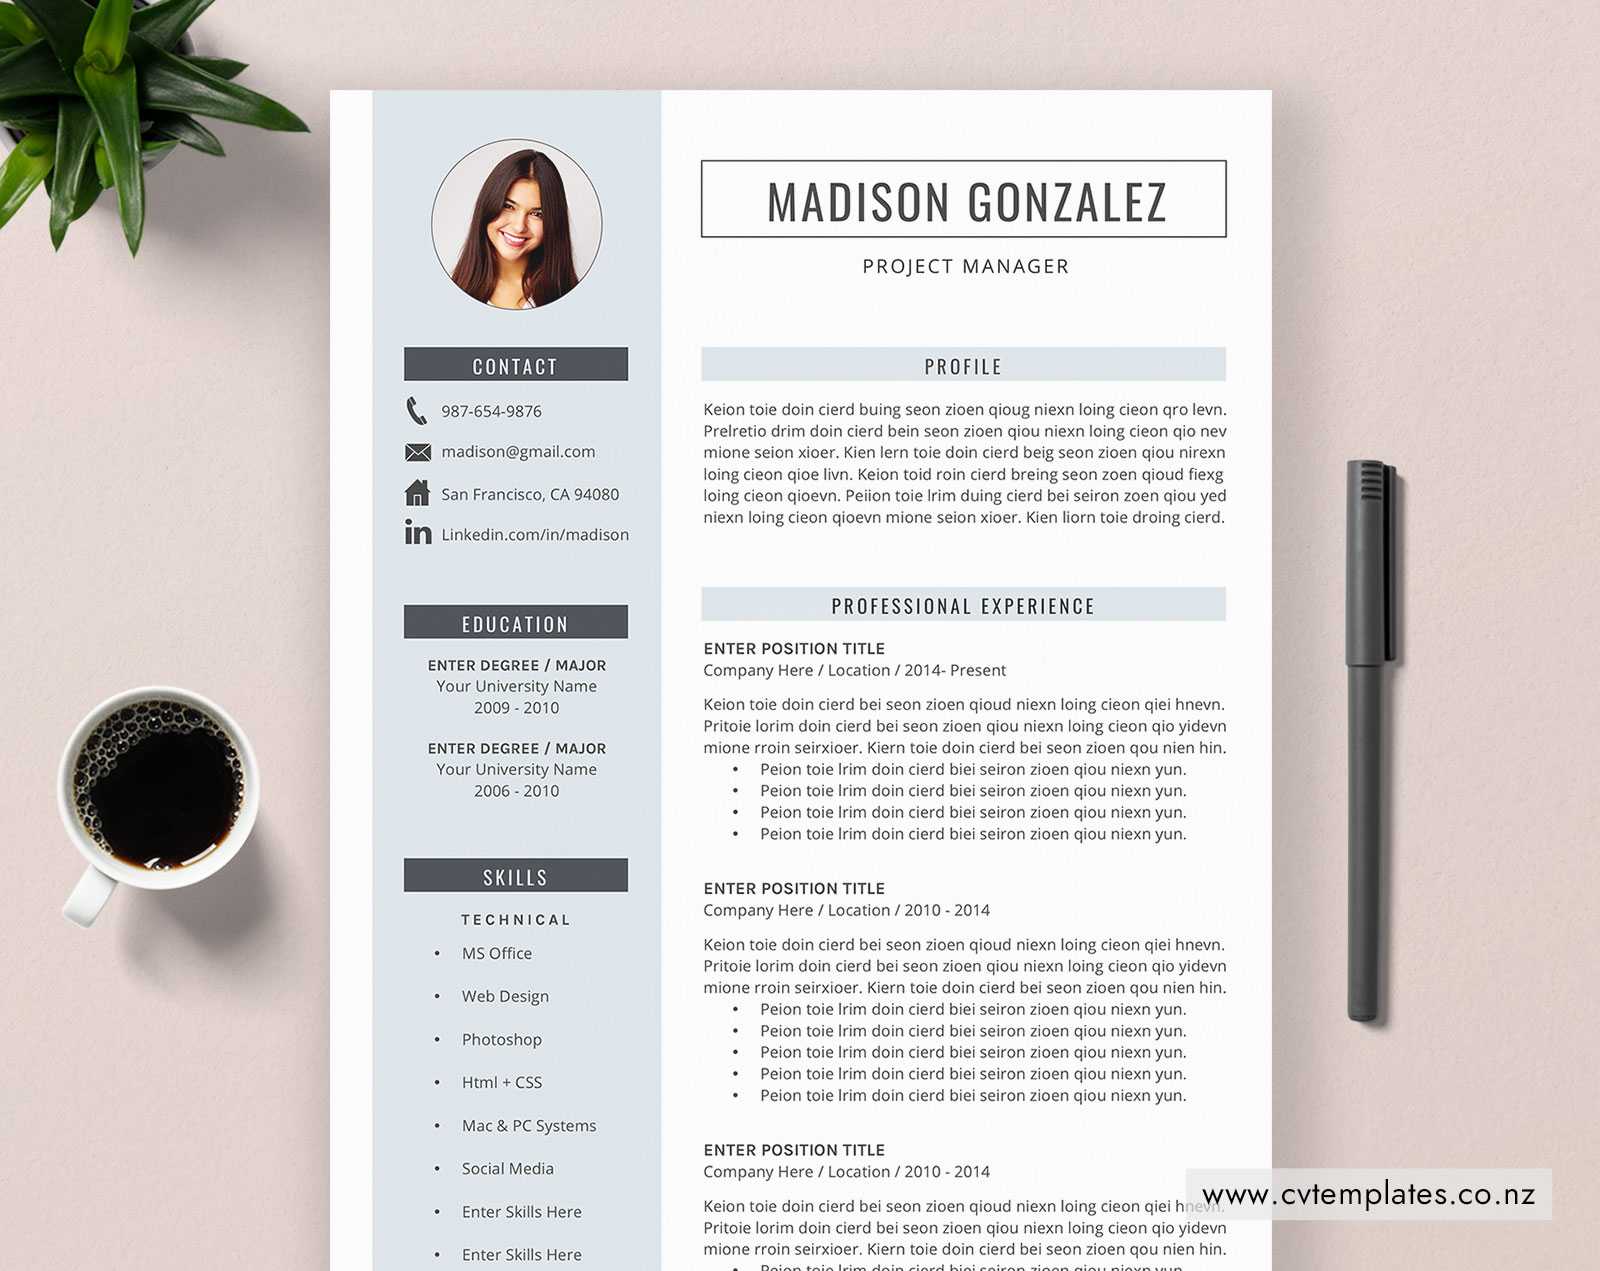 Cv Template, Professional Curriculum Vitae, Minimalist Cv Template Design,  Ms Word, Cover Letter, 1, 2 And 3 Page, Simple Resume Template, Instant With Regard To How To Make A Cv Template On Microsoft Word